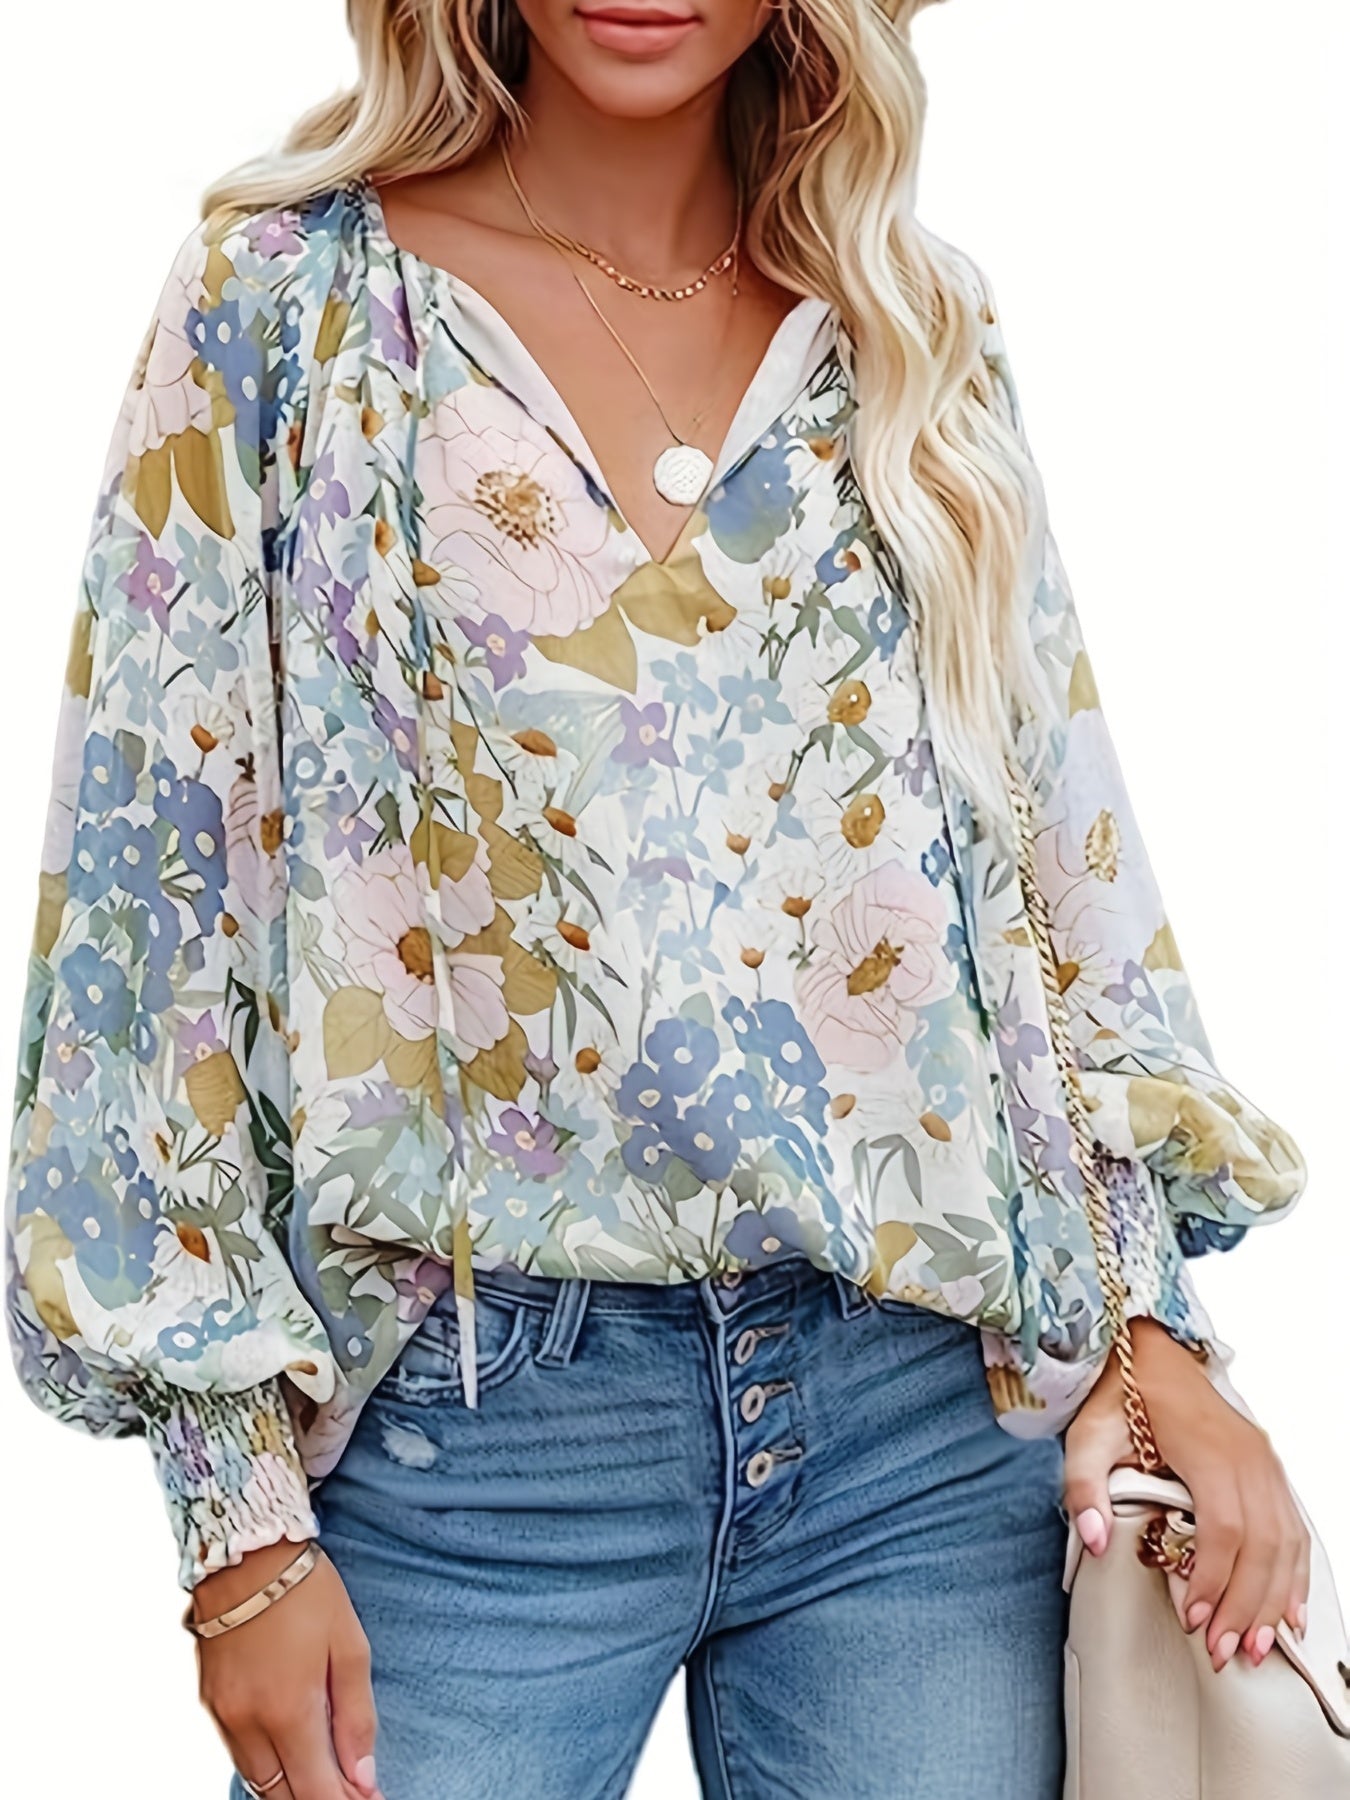 Bohe Floral Print Long Sleeve Blouse For Spring & Fall, Women's Spring Blouse